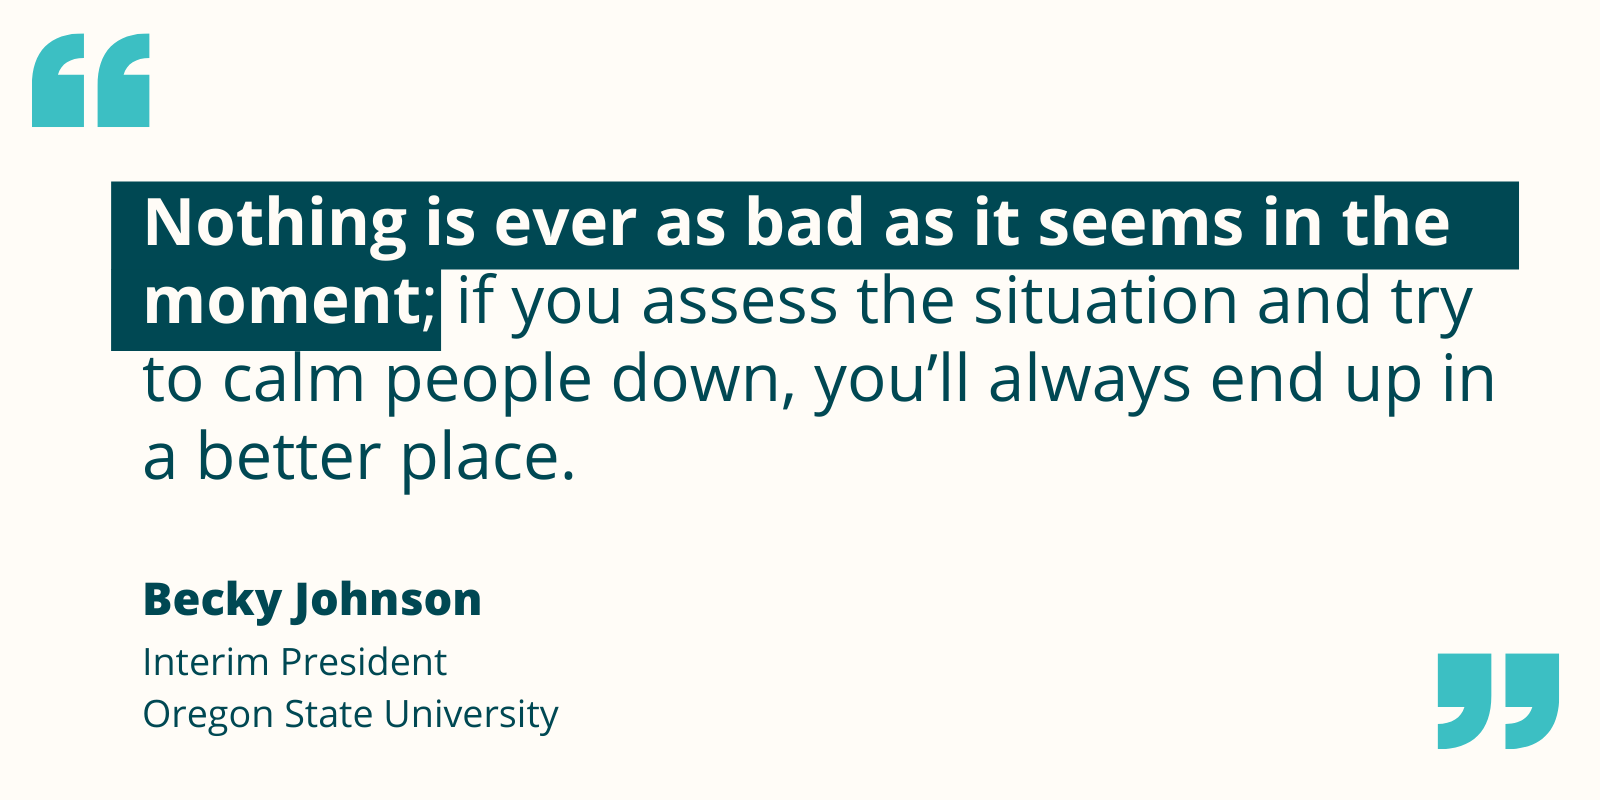 Quote by Becky Johnson re: how maintaining perspective and calm will always benefit oneself and others.